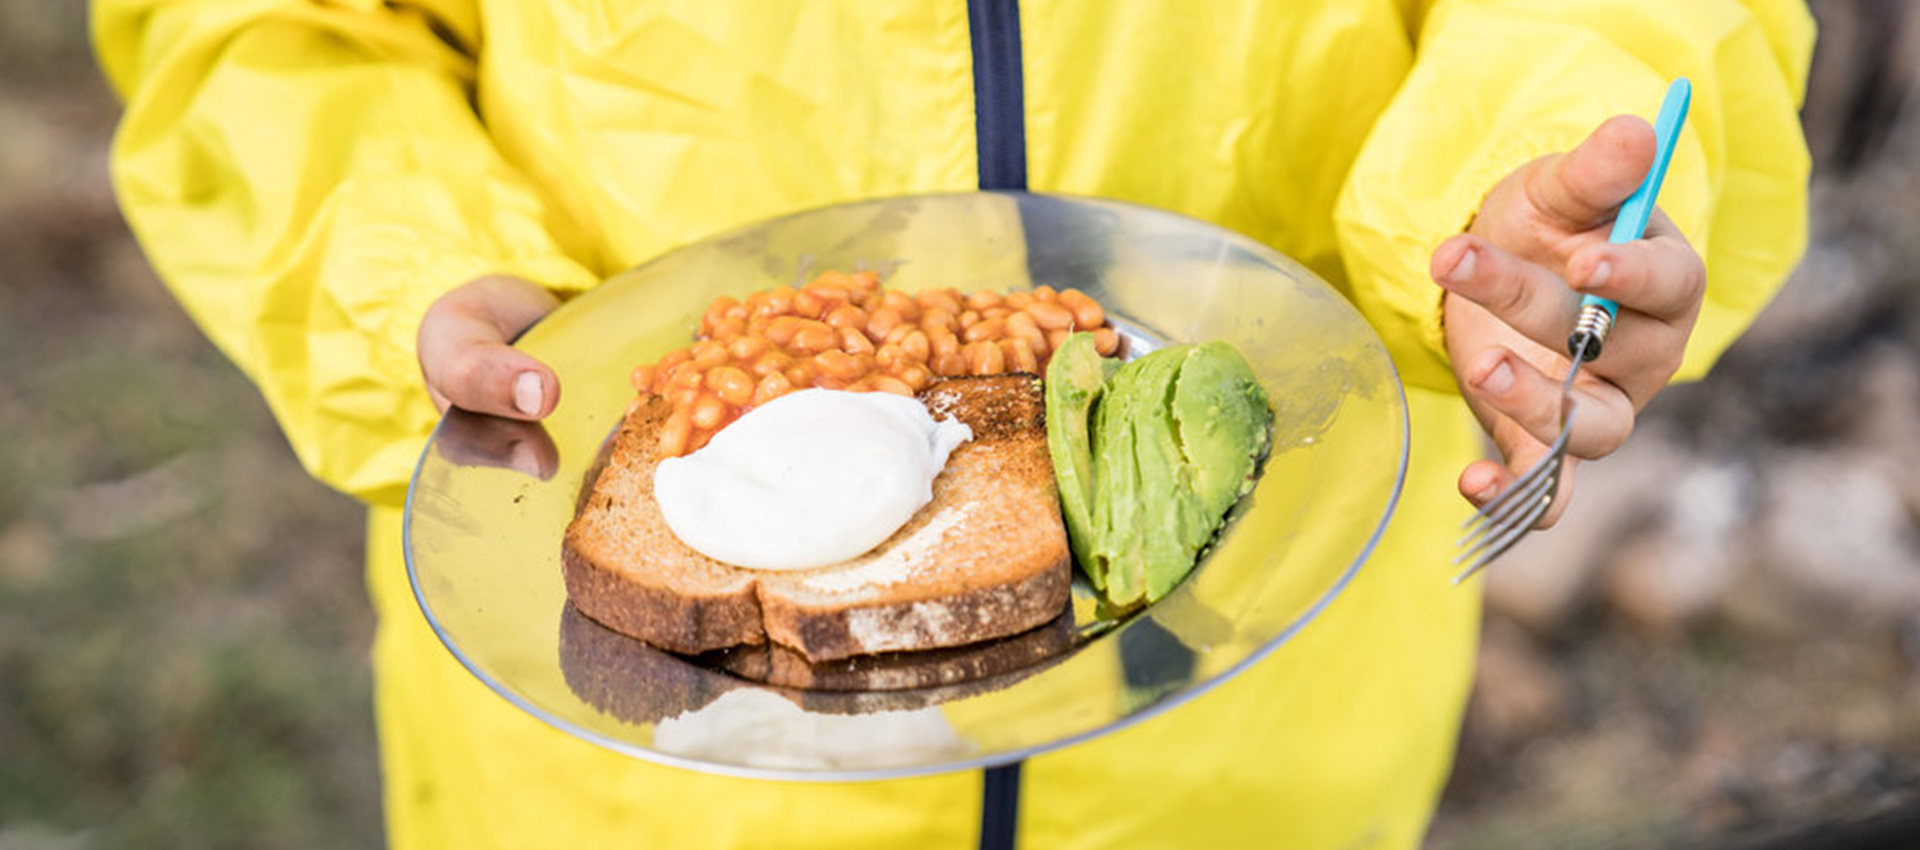 Camp Food For Your Camping Trip